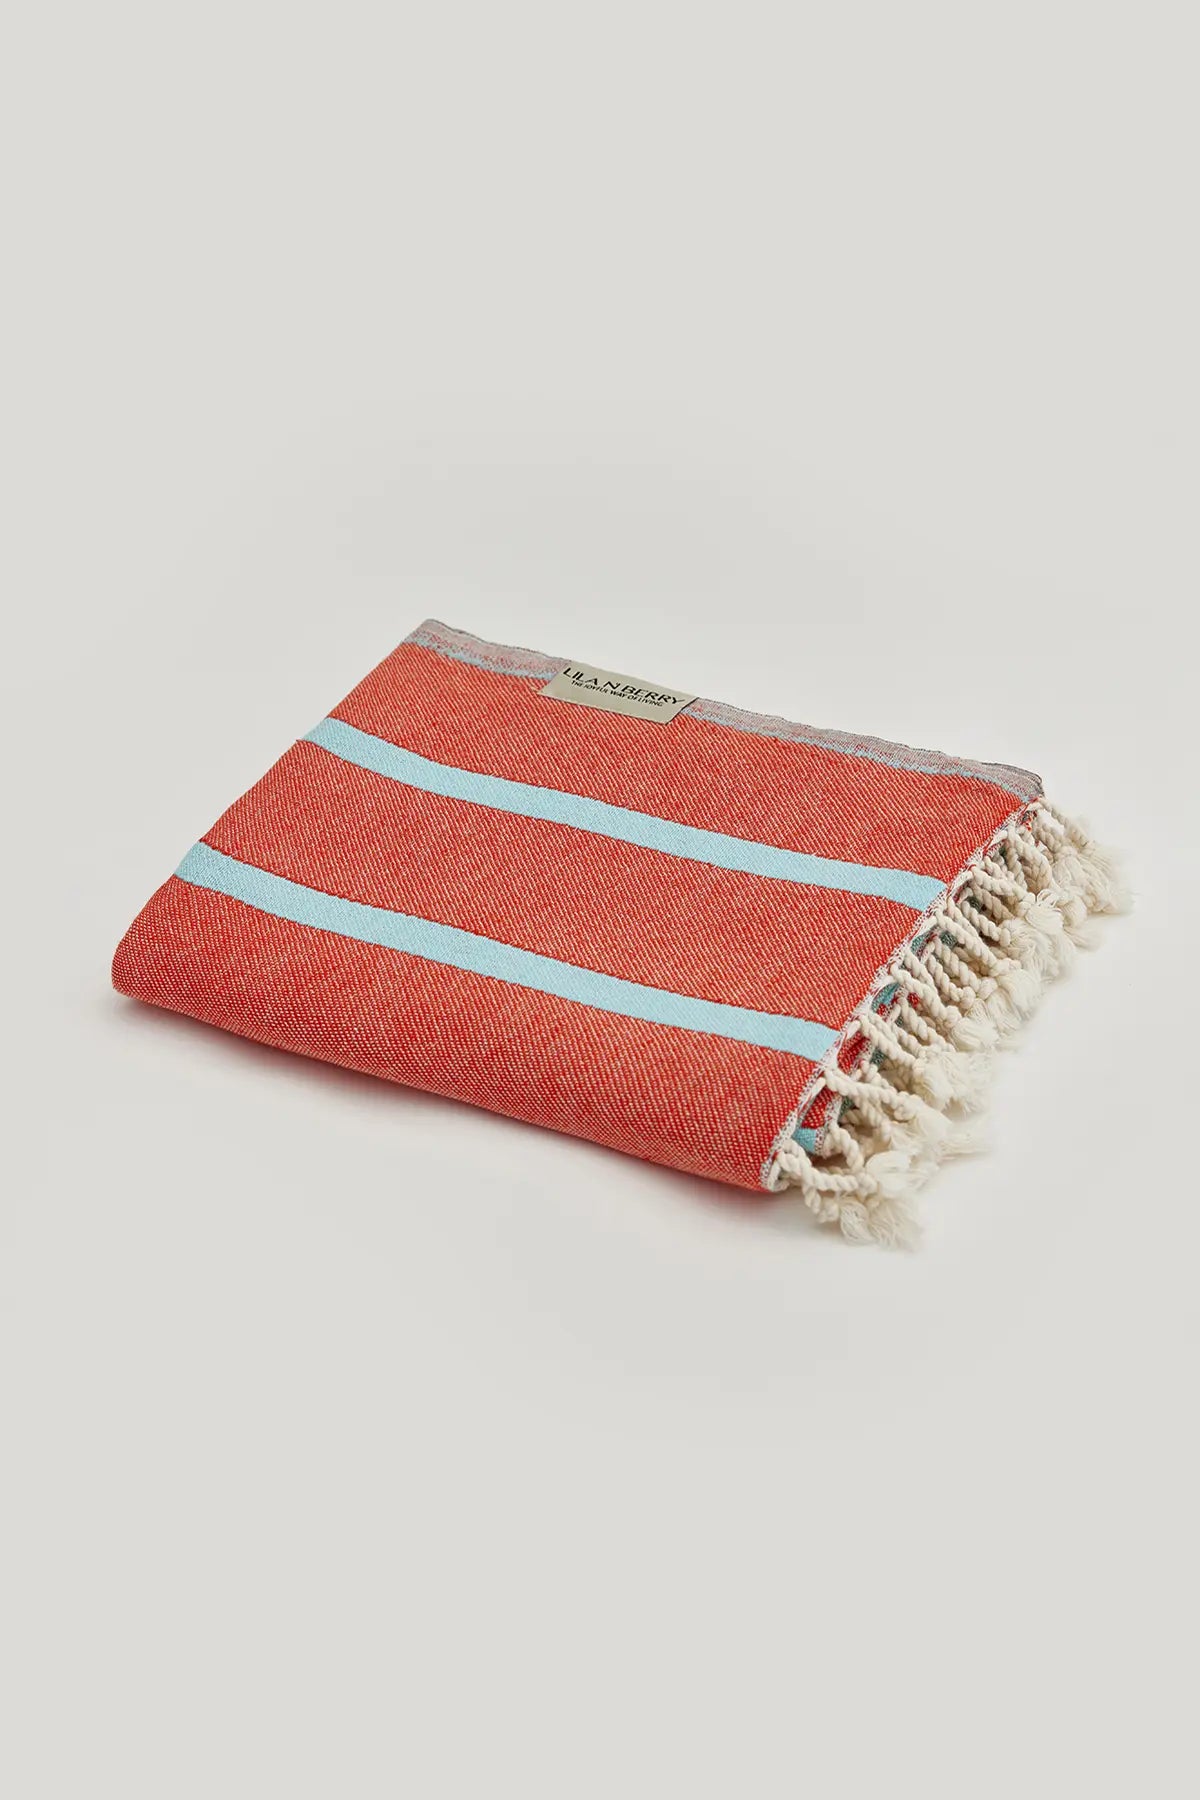 Beach/Bath,Sage-Terra,Turkish towel, folded,summer,line patterned,double-faces,purified sand,light,compact, easy pack,fun, recycled,double color